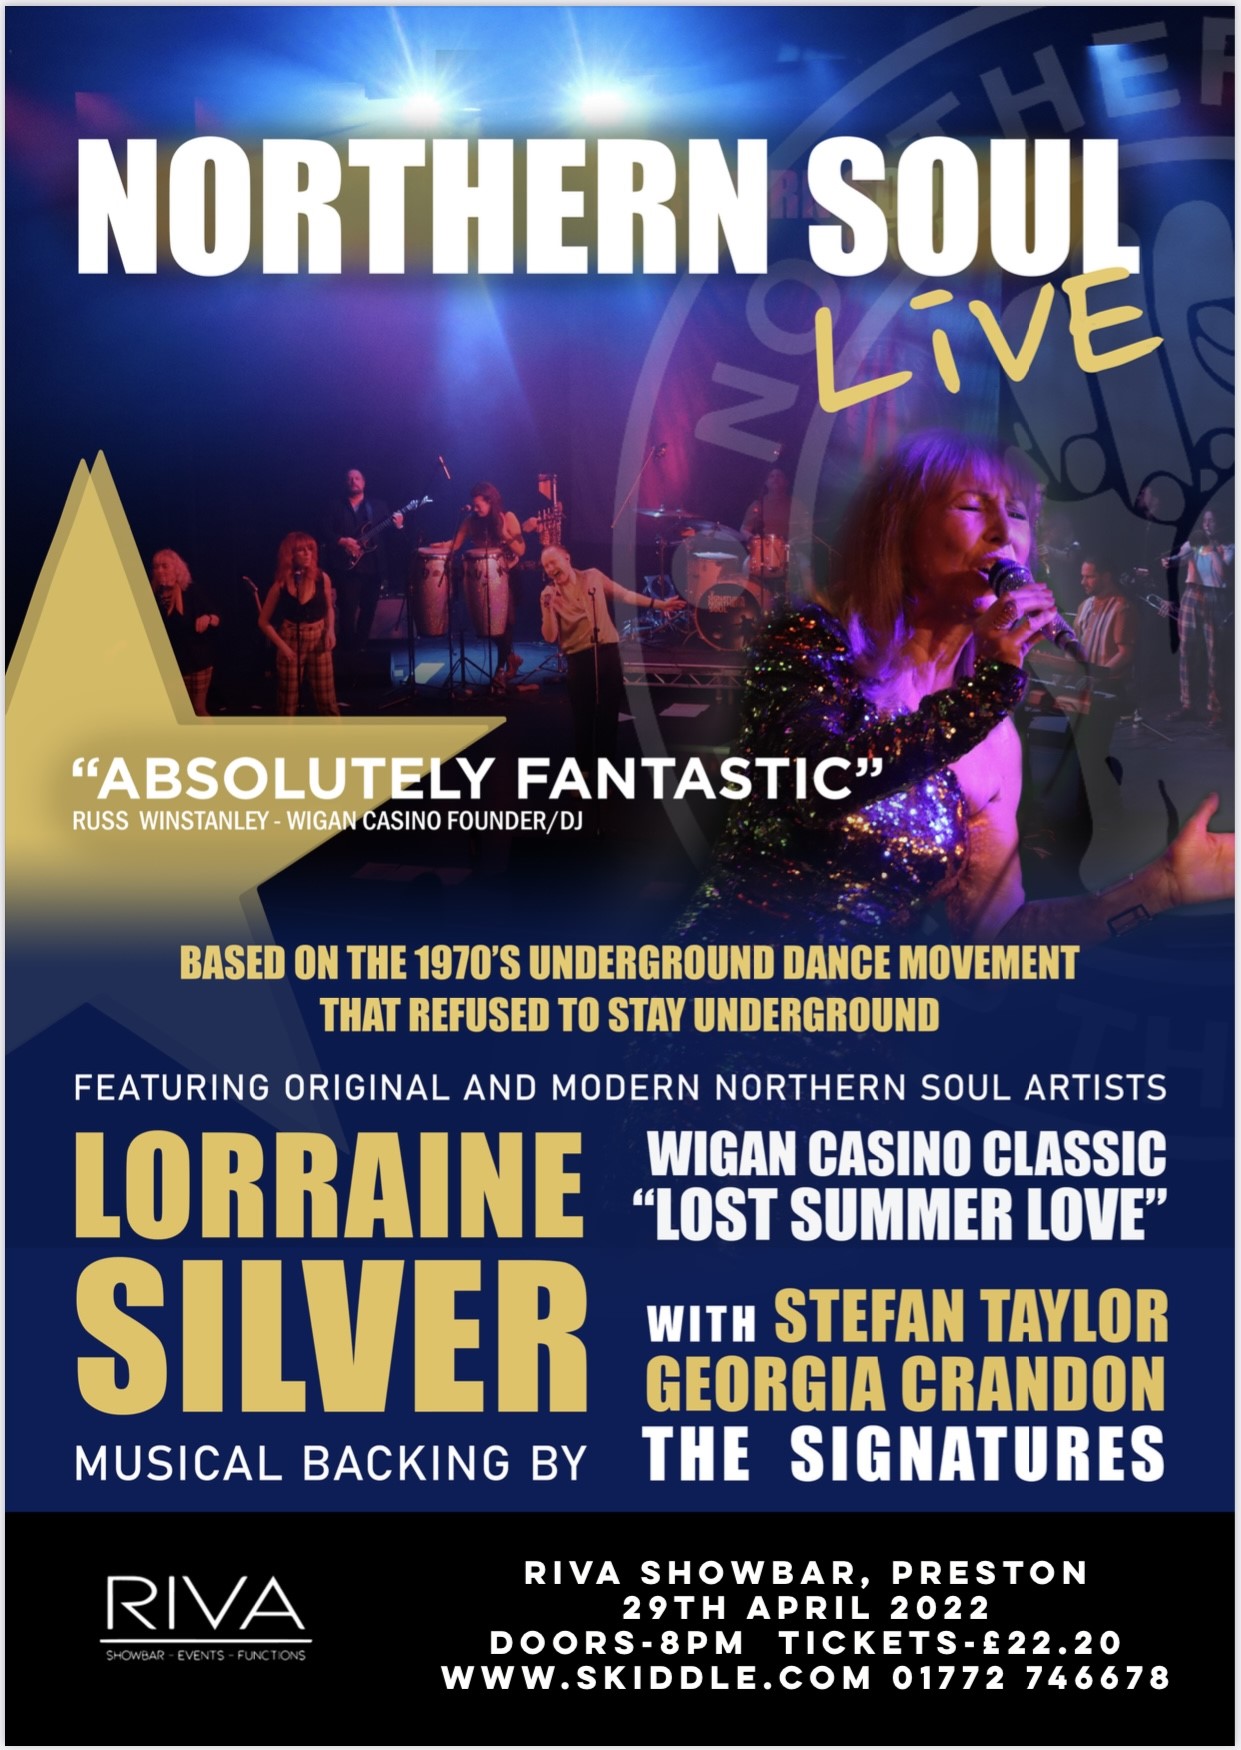 Wigan Casino Revival Night with The Signatures & Lorraine Silver Plus After Show DJ Set by Wigan Casino Legends Russ Winstanley & Alan King on abr. 29, 19:30@Riva Showbar Preston - Buy tickets and Get information on RS PROMOTIONS 